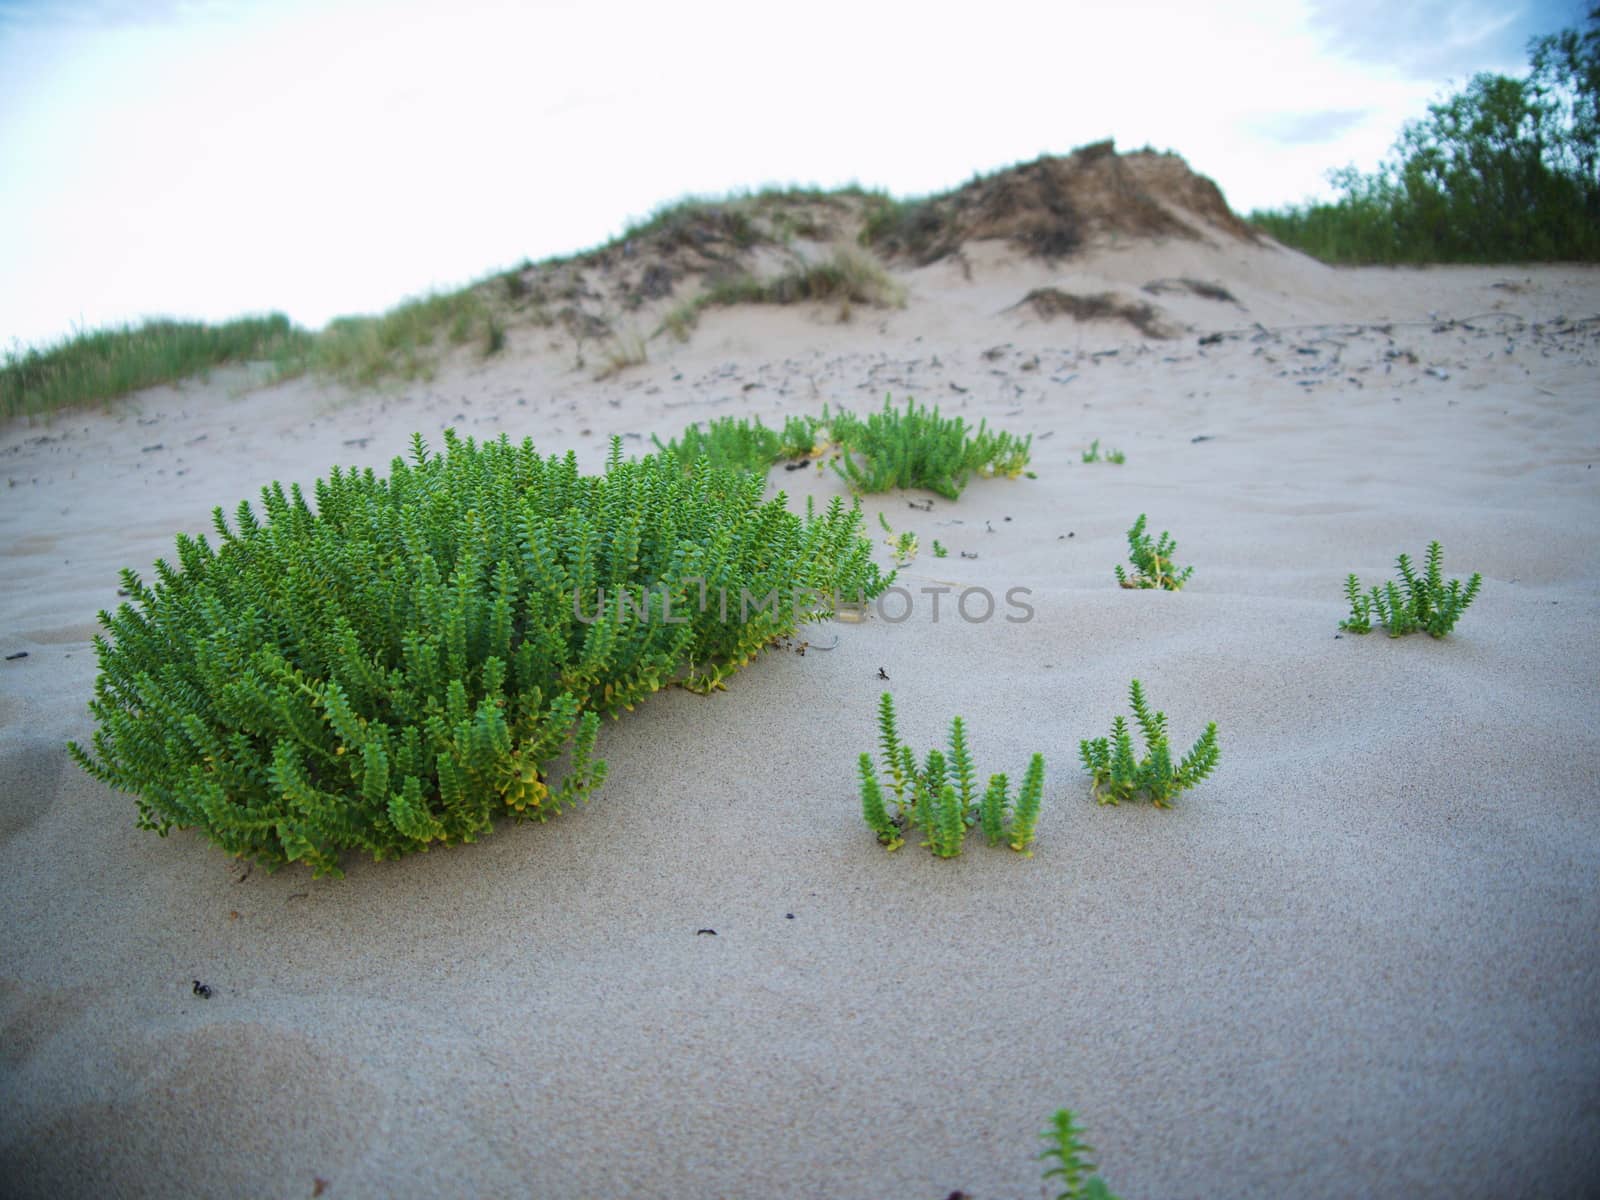 beach with sand dunes and a greengrass at the sea